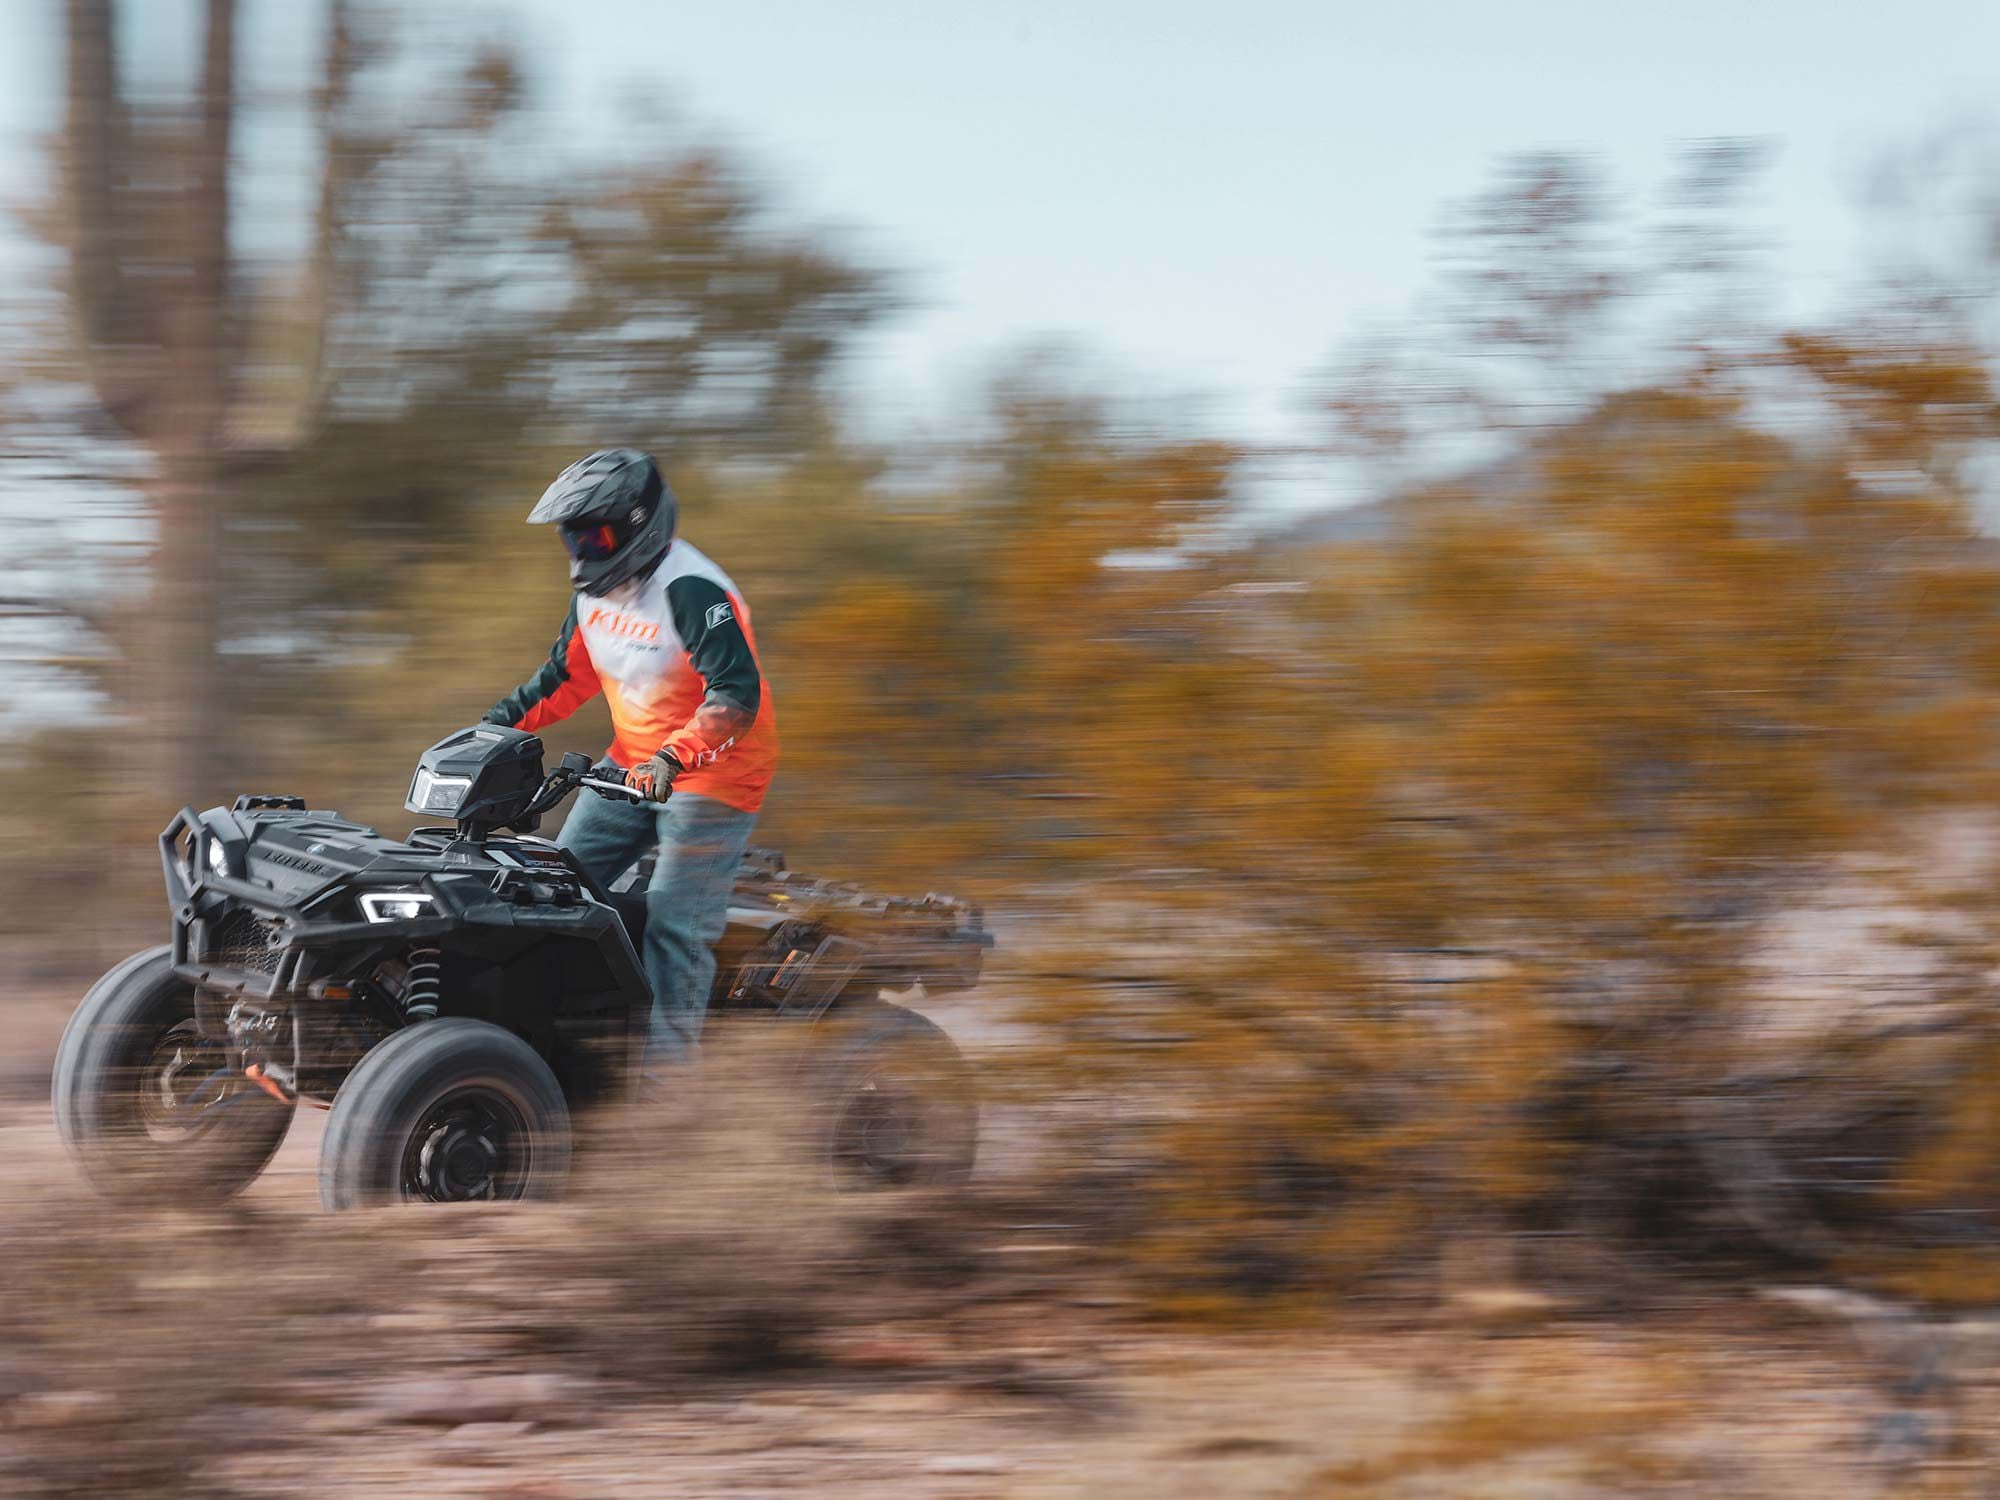 If you like speed, the 2022 Polaris Sportsman XP 1000 doesn’t disappoint.